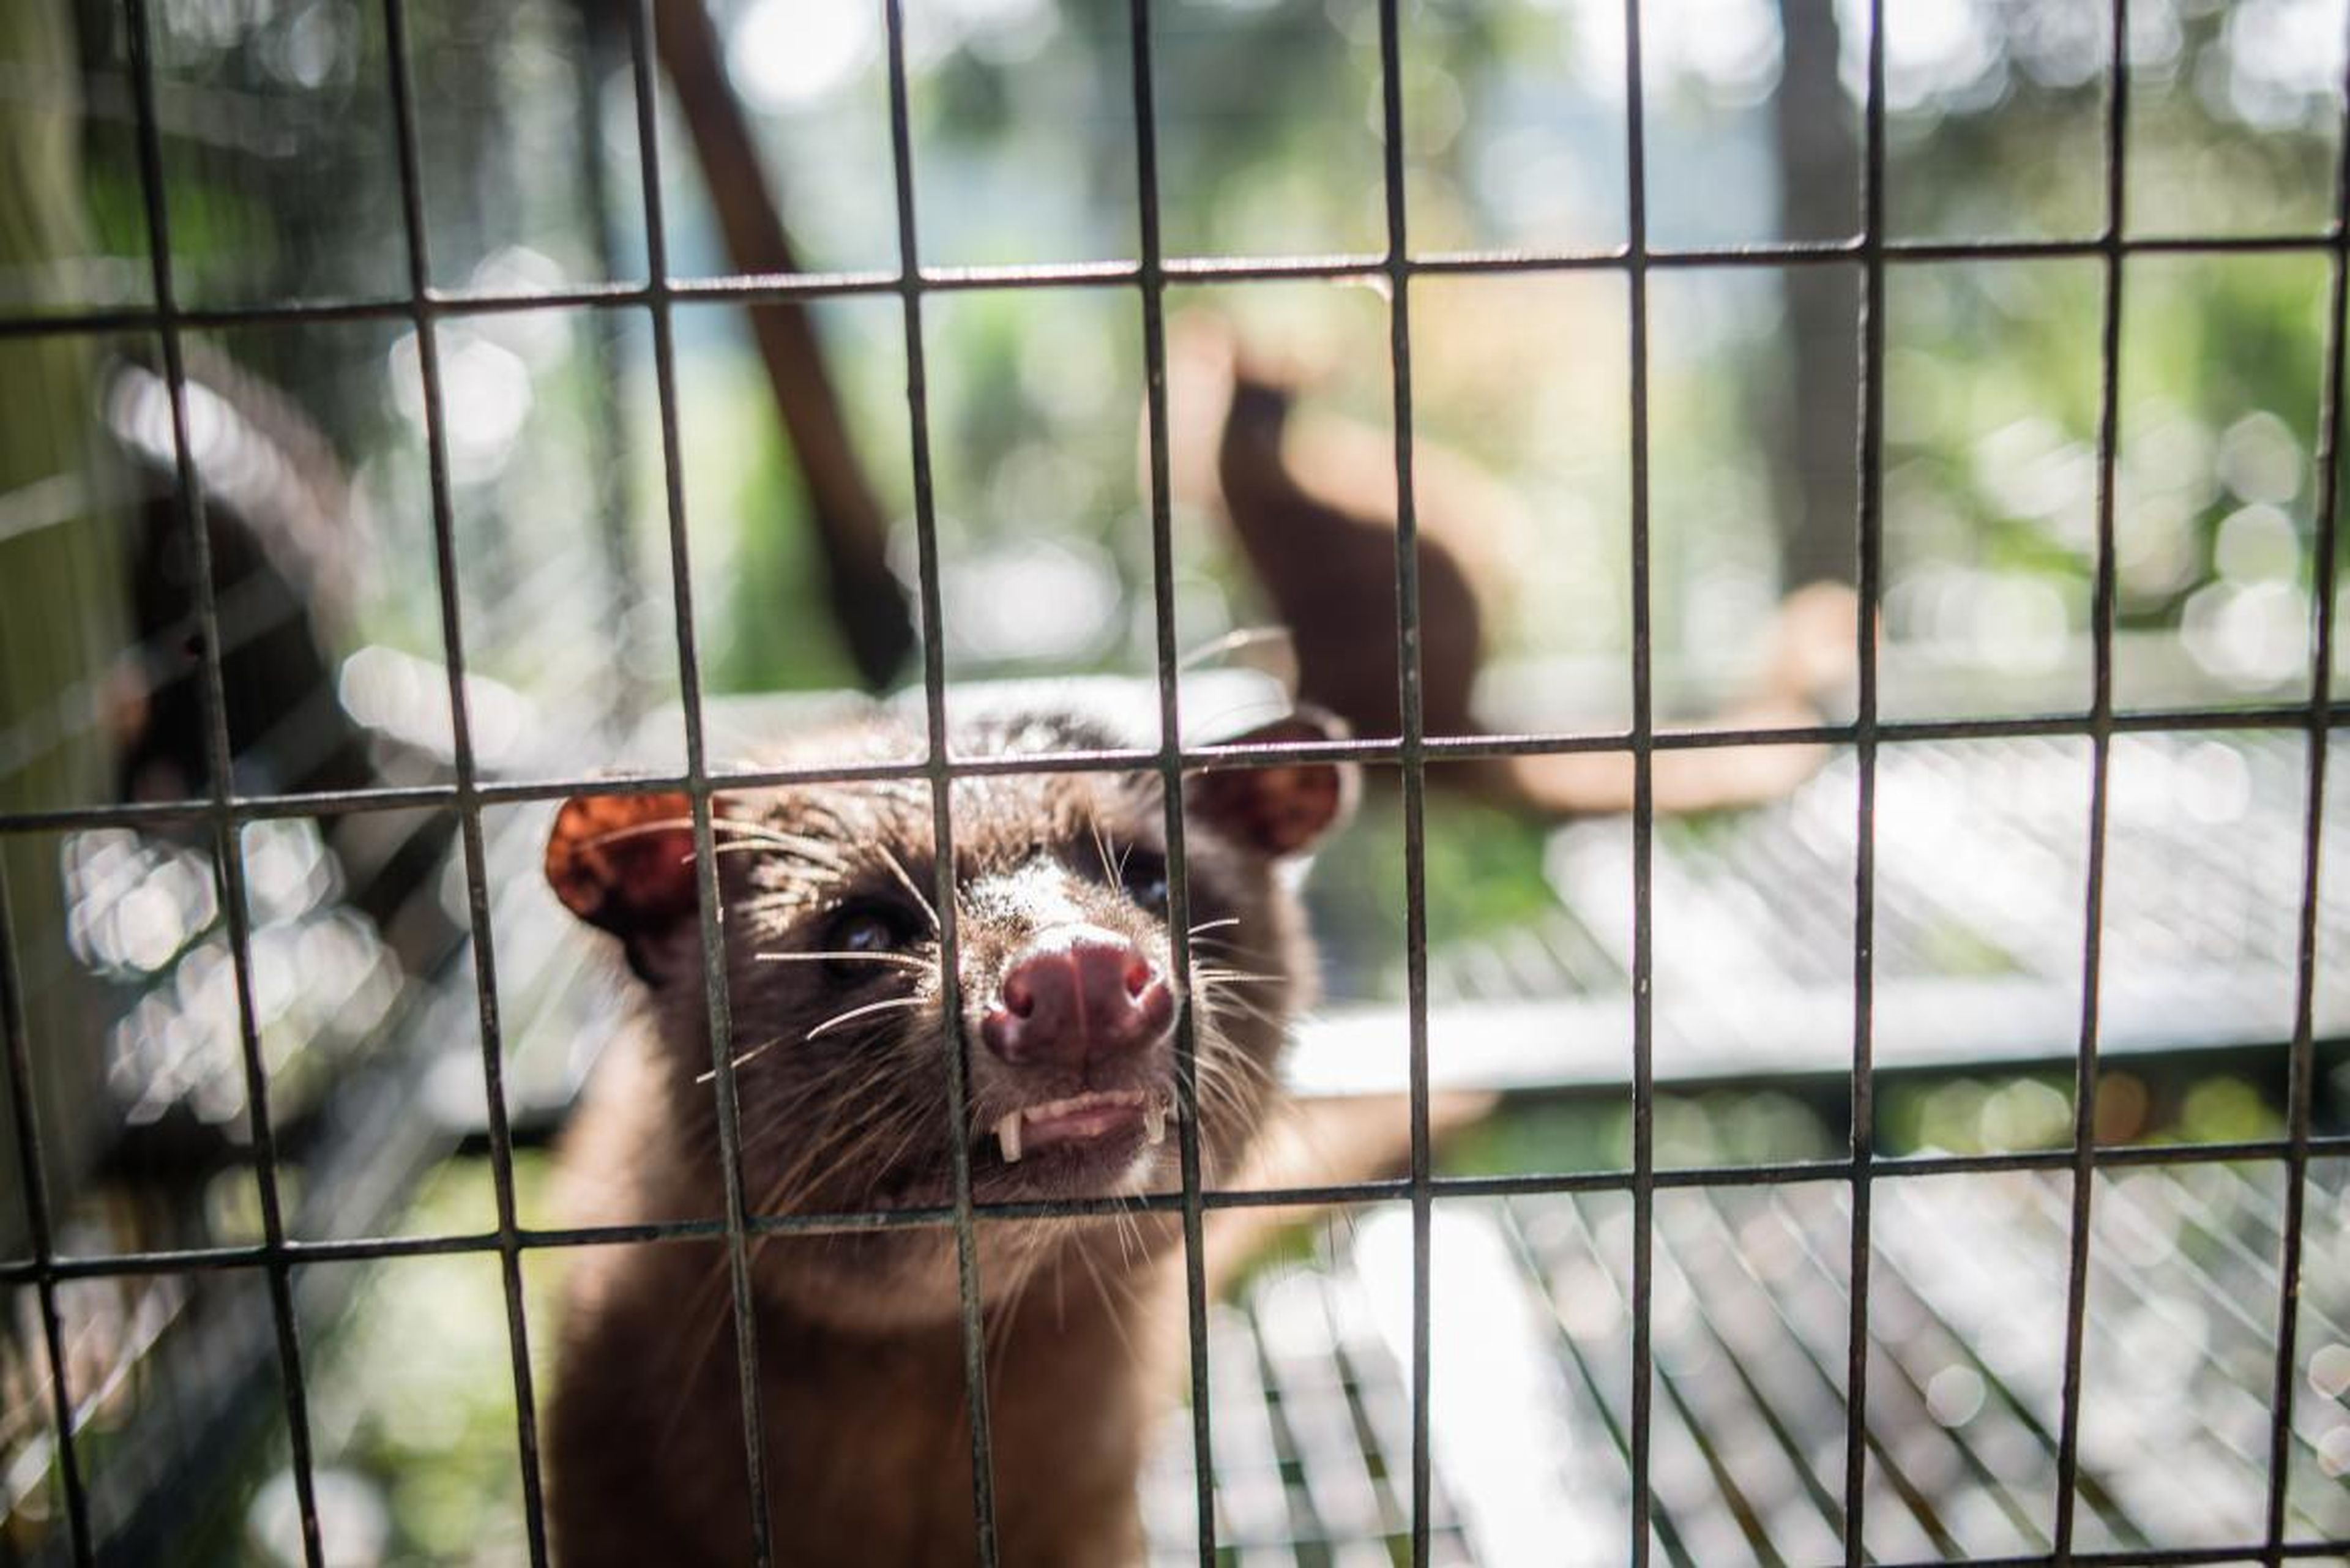 An Asian palm civet in a cage at Kopi luwak farm and plantation in Ubud District, Bali, Indonesia, on November 20, 2018.